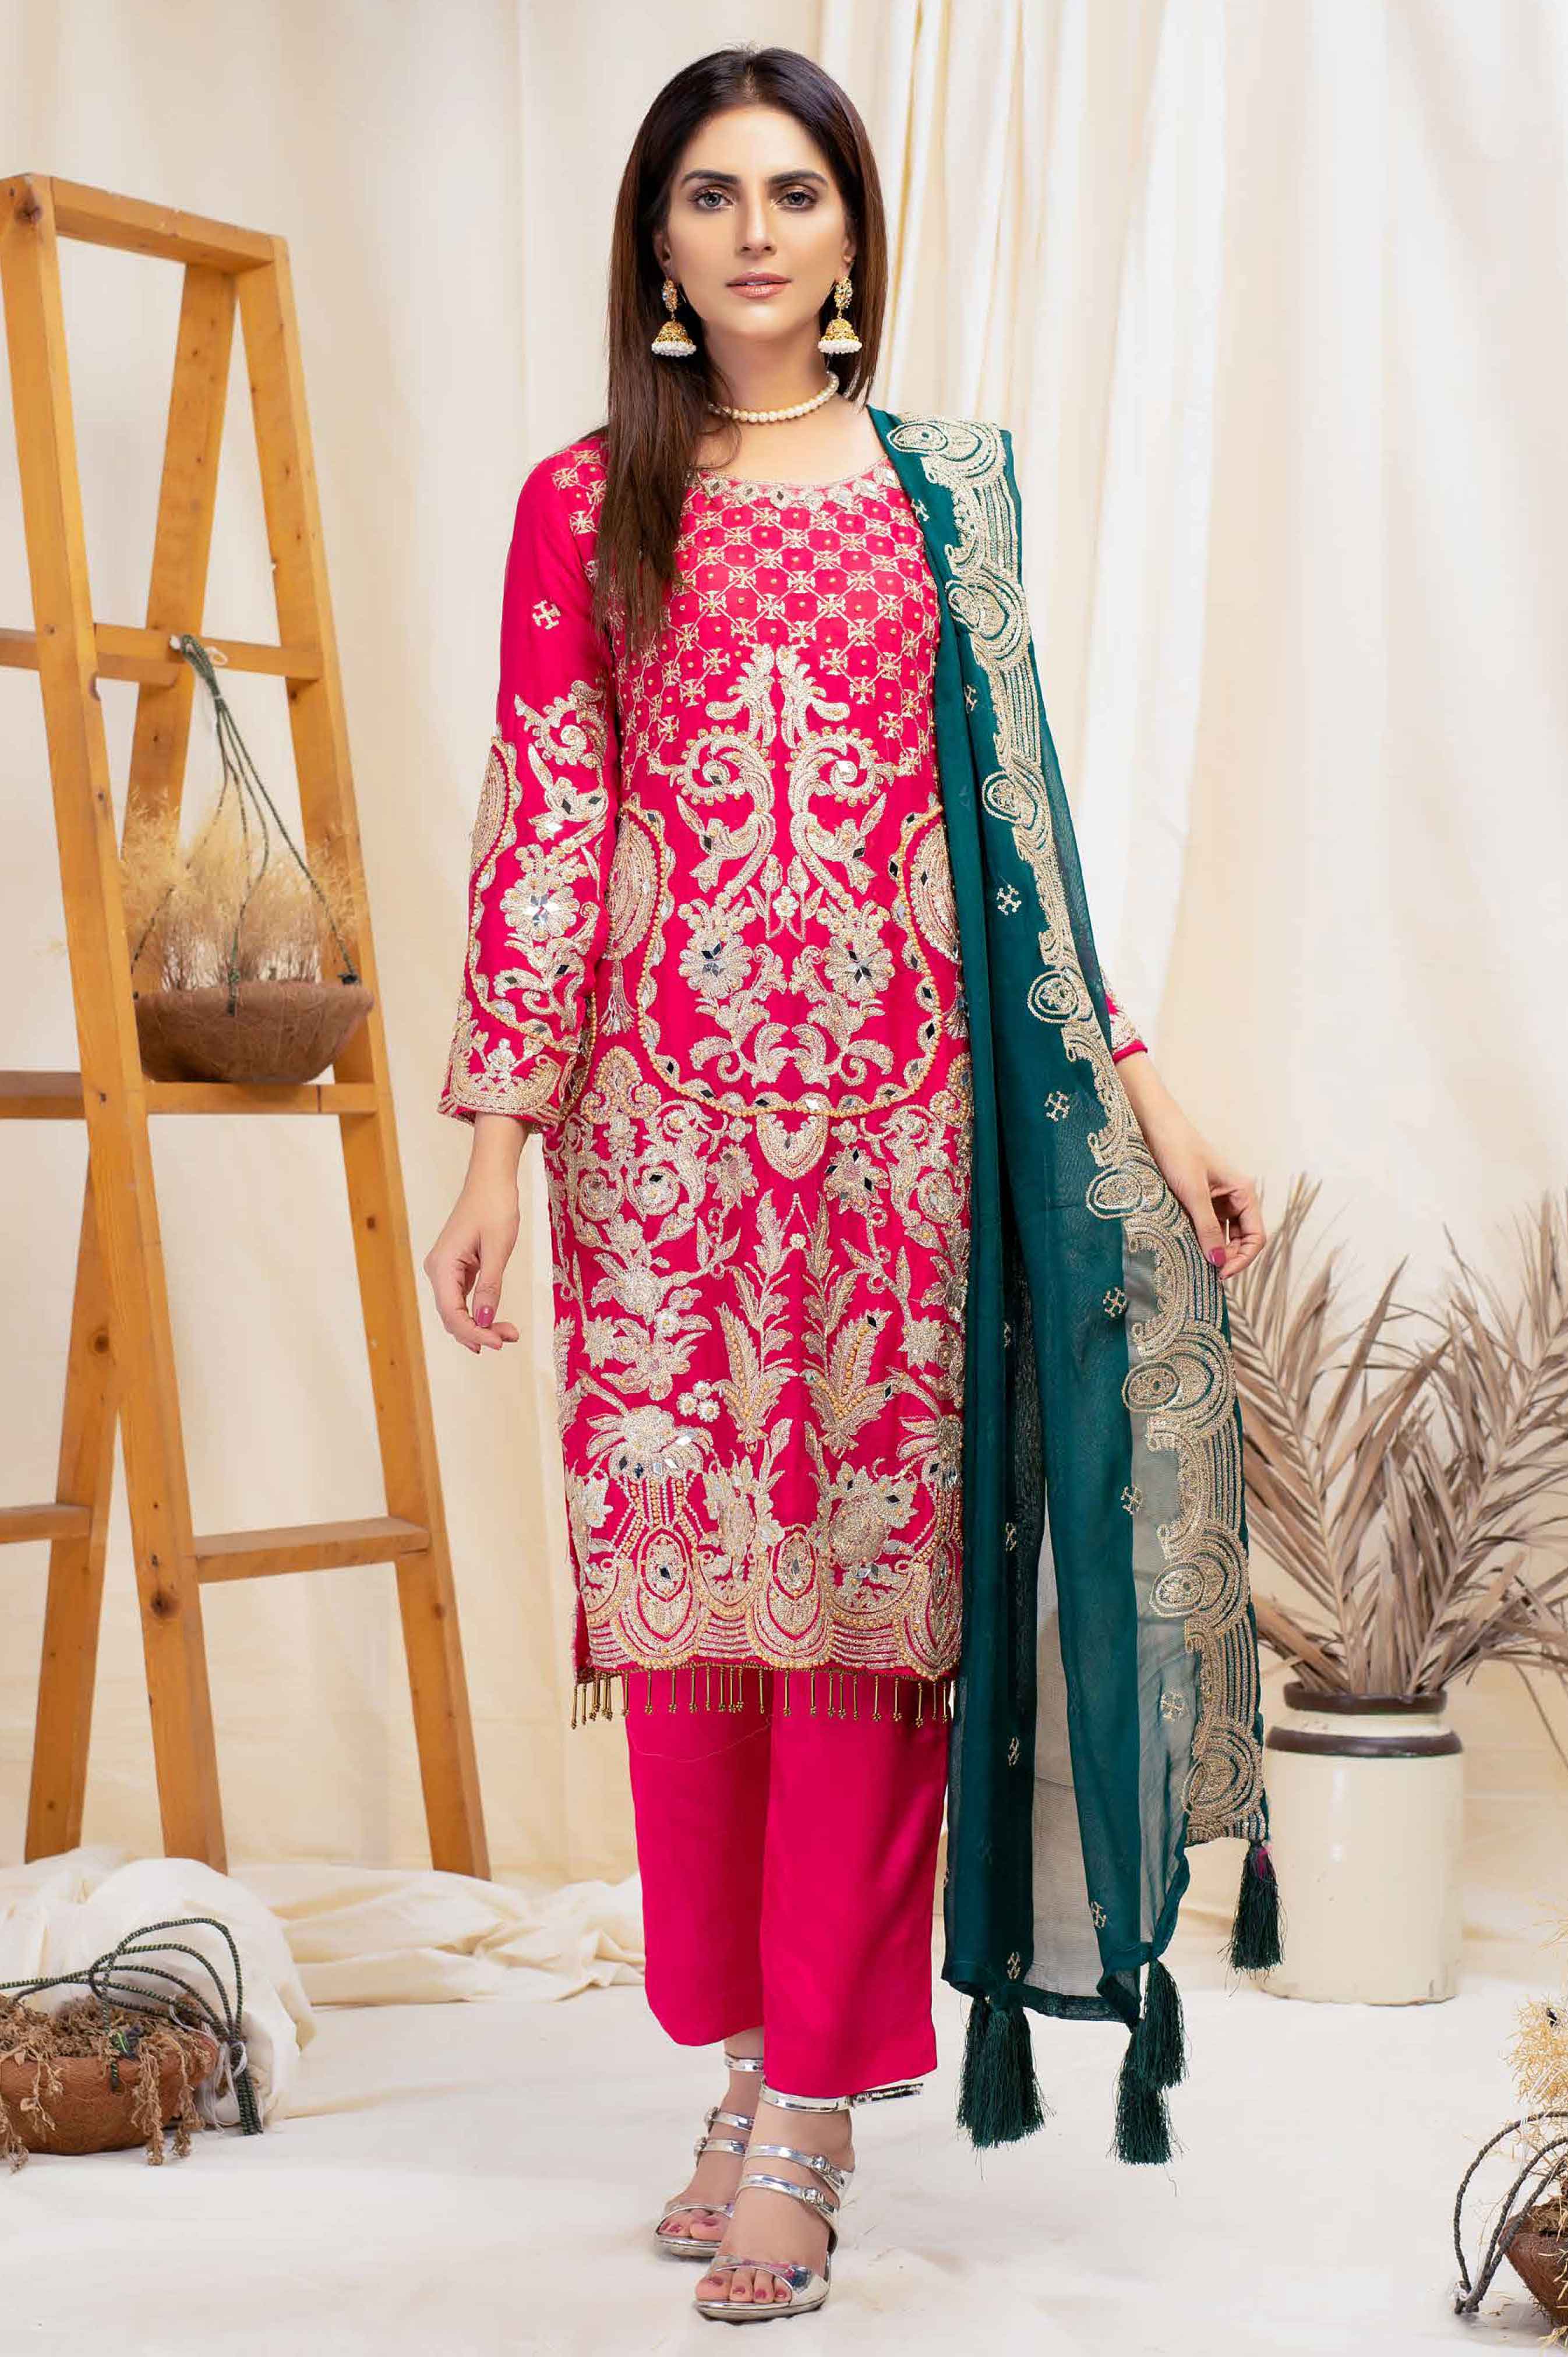 Simrans Semi Formal Ladies Pink Outfit With Contrasting Dupatta